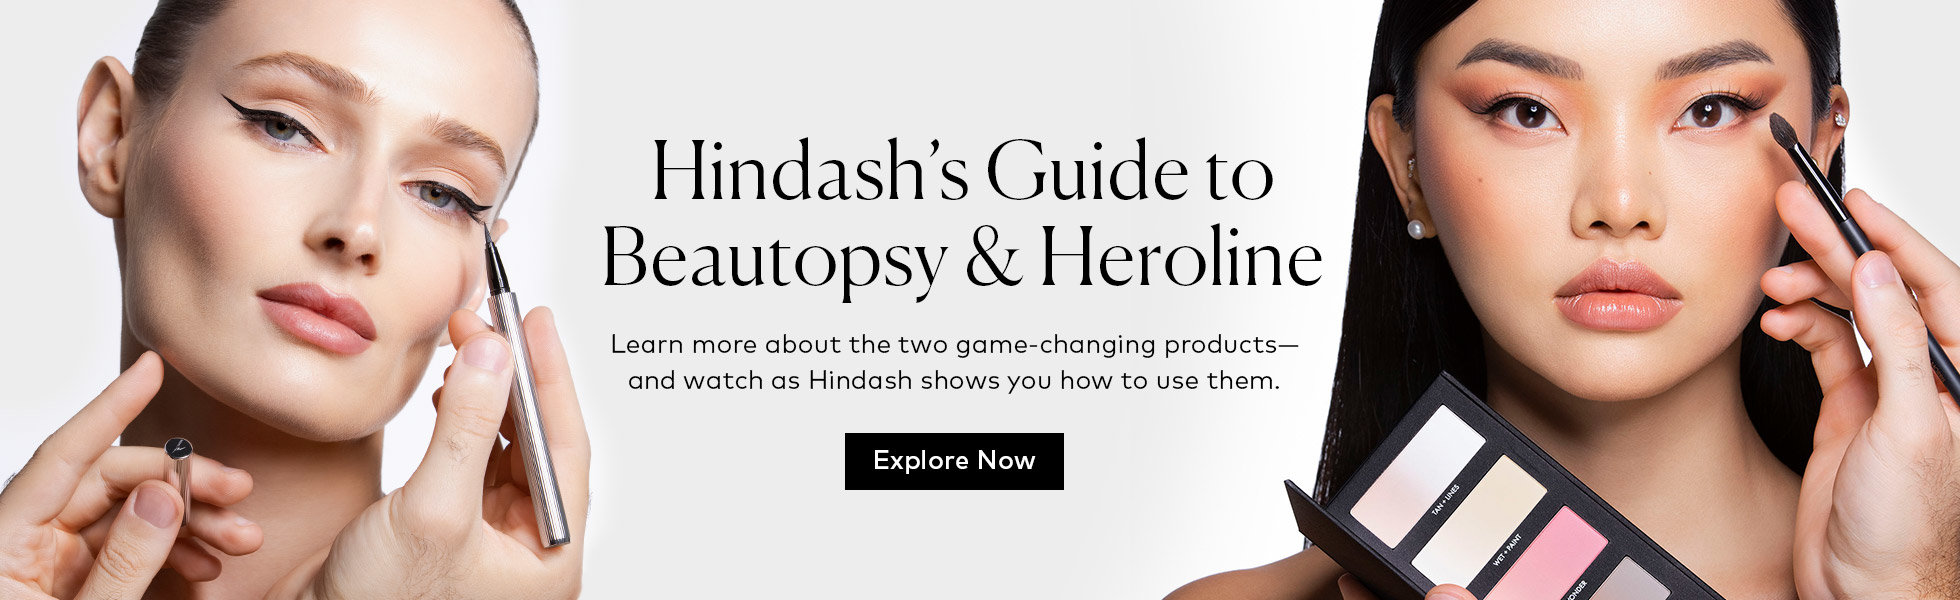 Hindash's Guide to Beautopsy and Heroline. Explore tutorials created by Hindash.